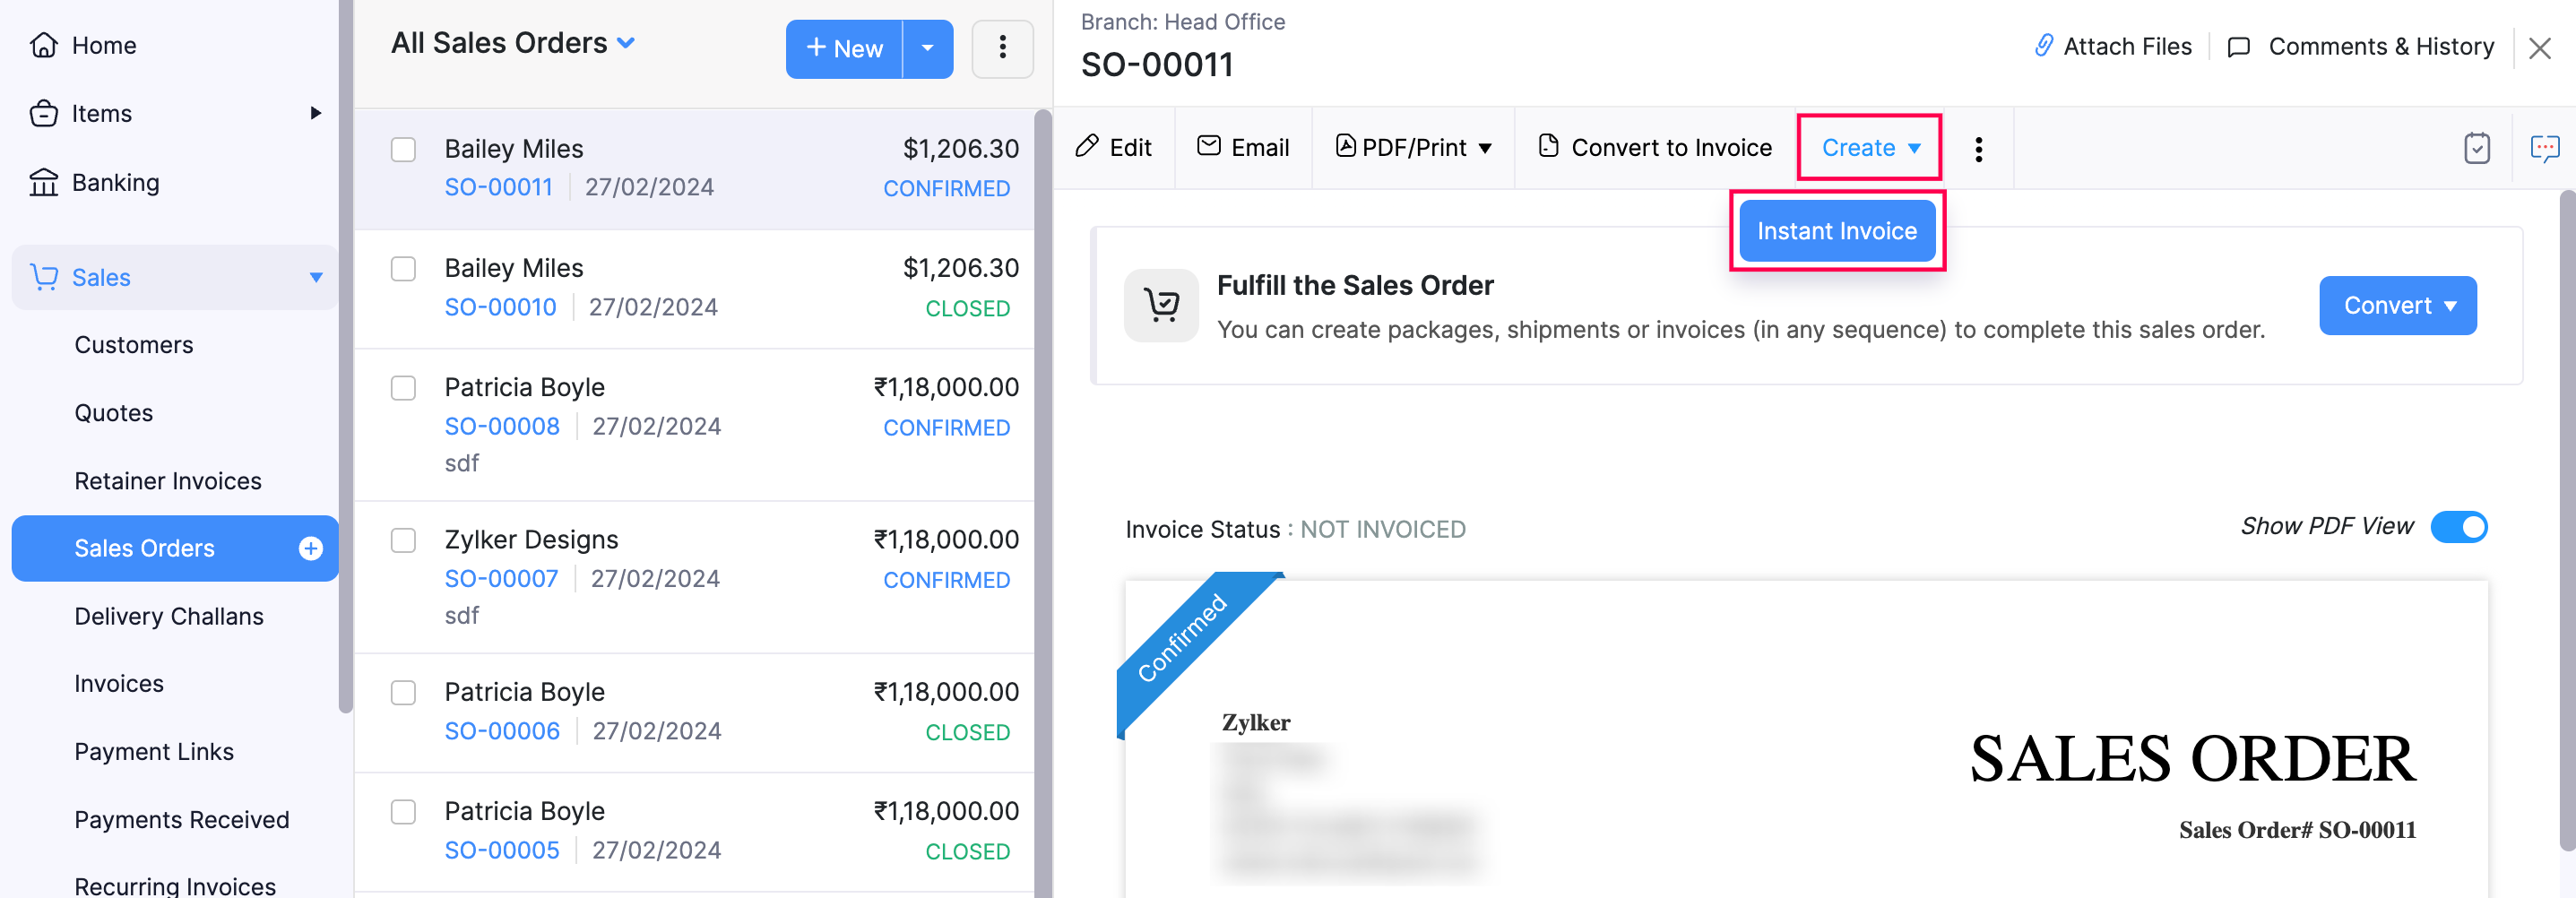 Instant Invoice button in a sales order in Zoho Books